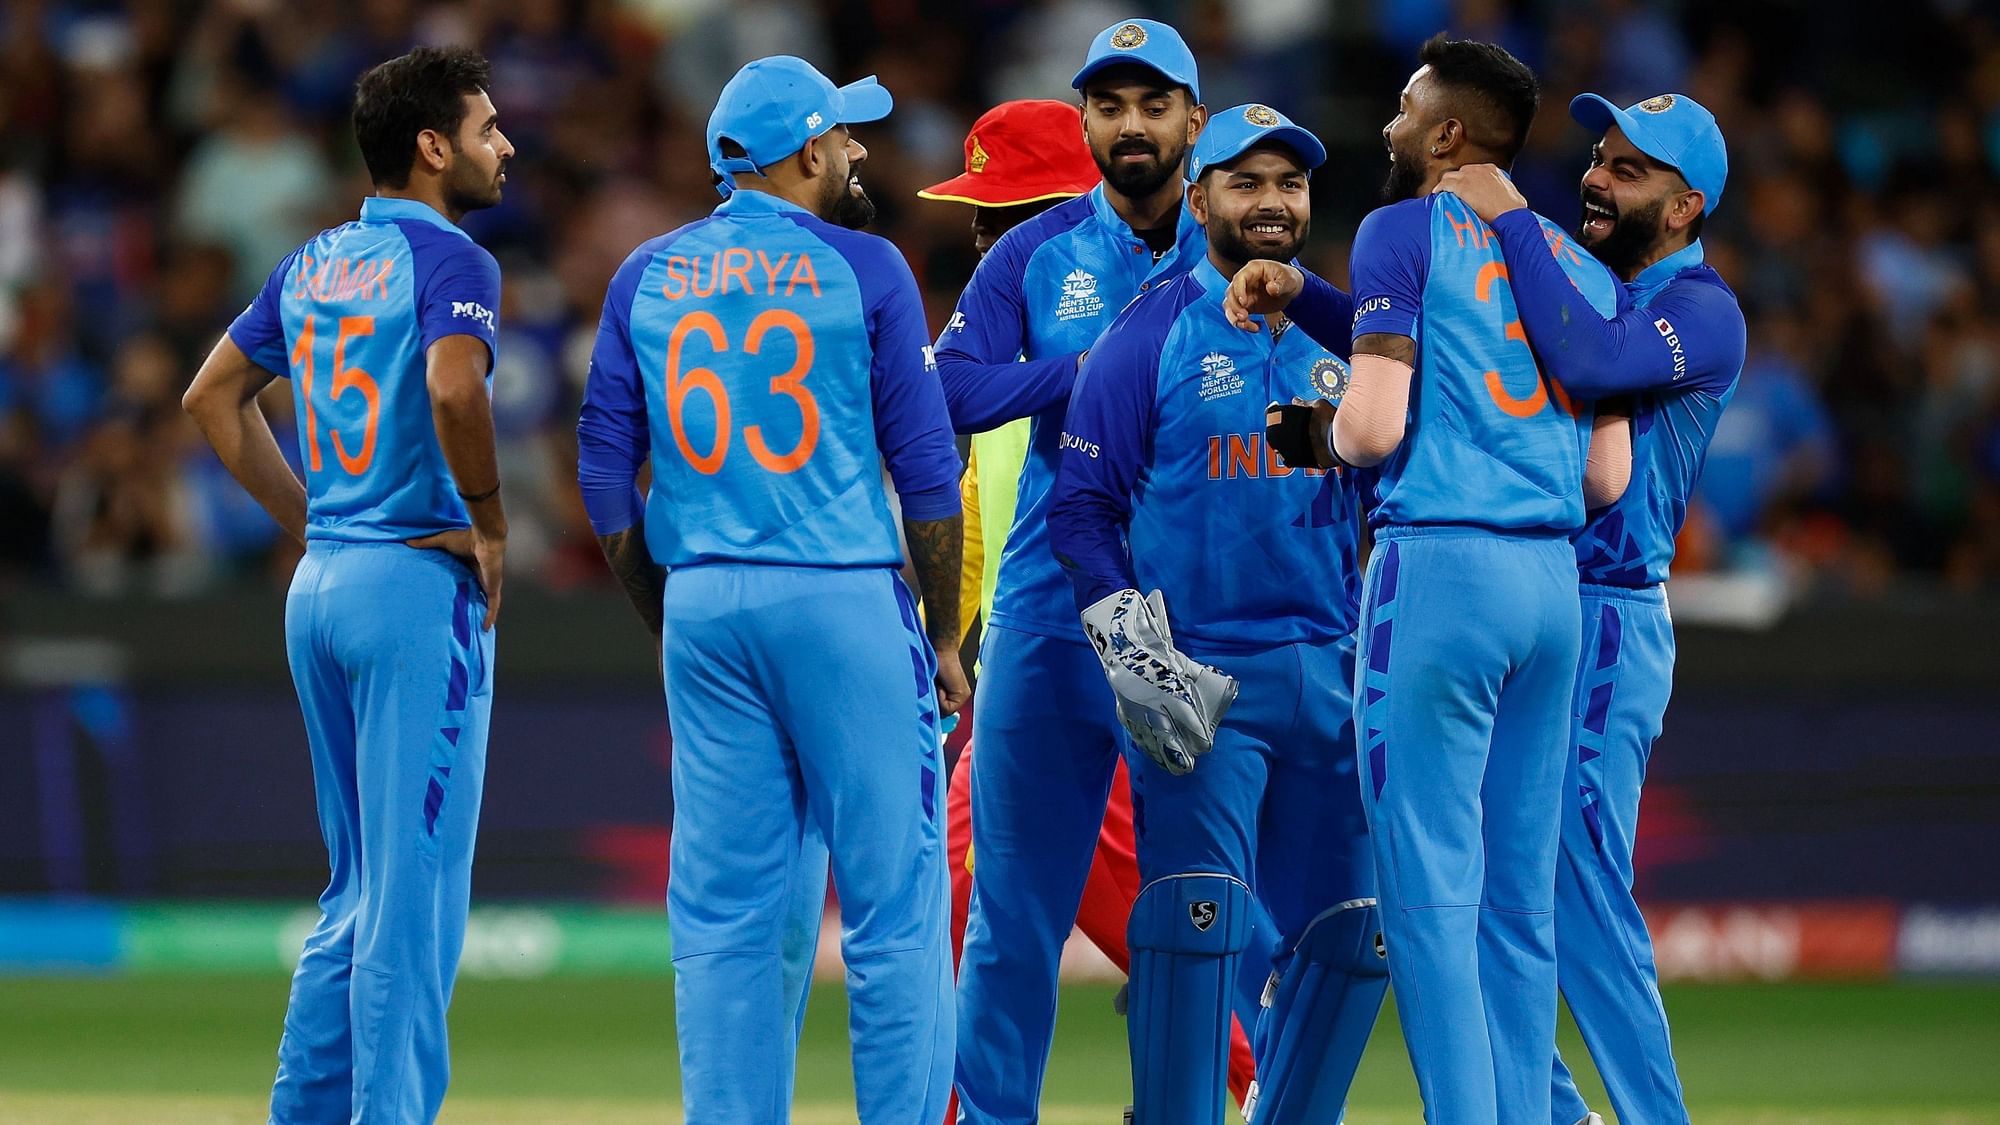 India vs England T20 World Cup 2022 Semi-final Date, Time, Venue, Live Streaming App and TV Channel in India, Latest Details